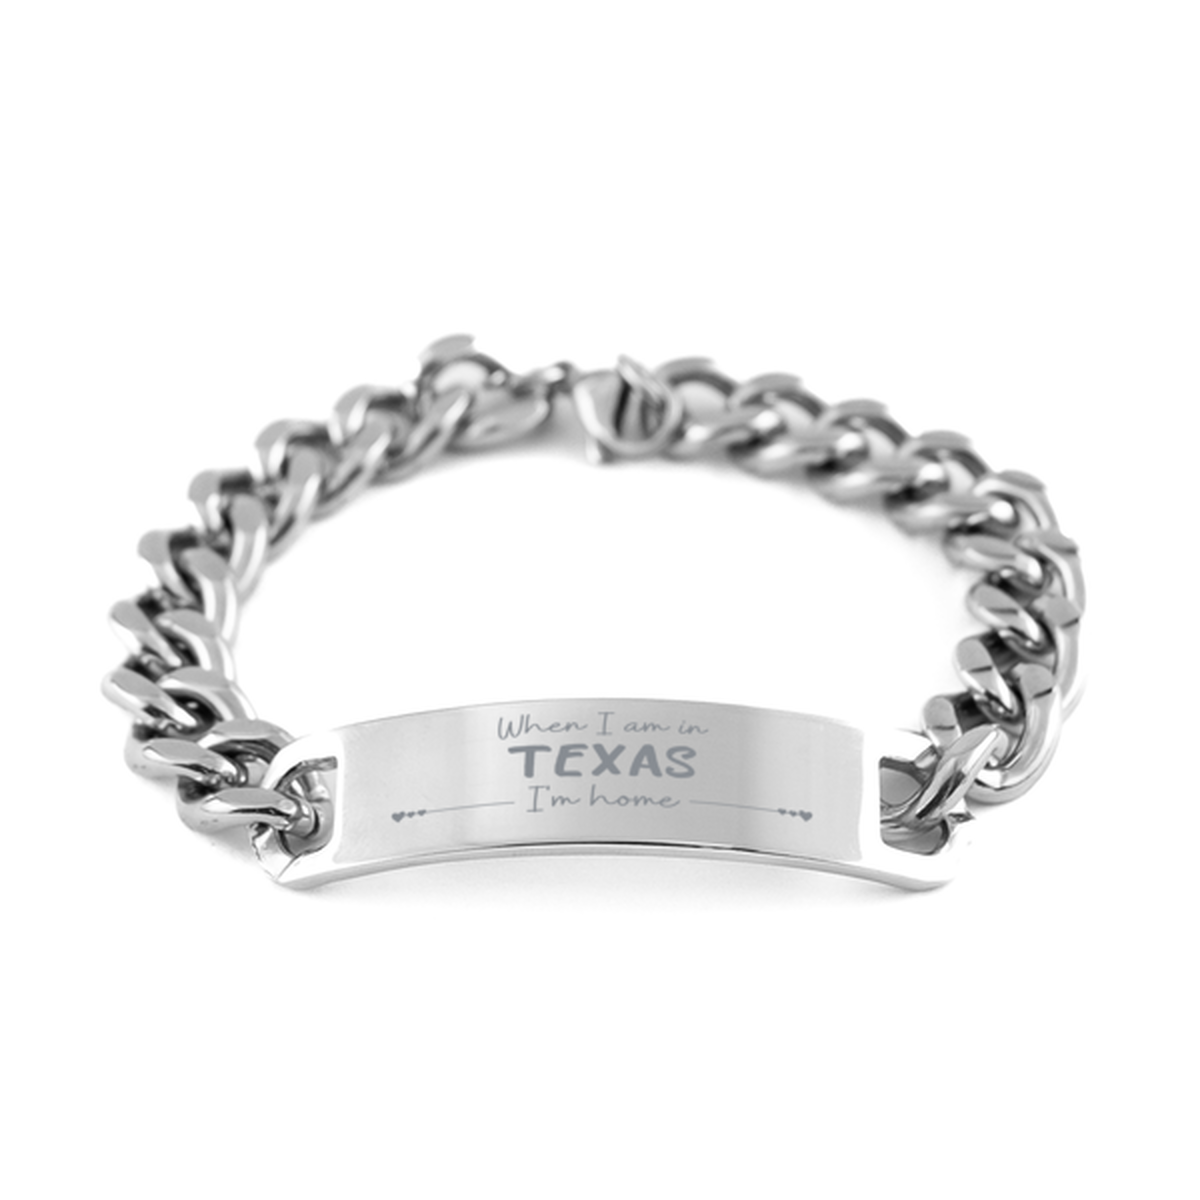 When I am in Texas I'm home Cuban Chain Stainless Steel Bracelet, Cheap Gifts For Texas, State Texas Birthday Gifts for Friends Coworker